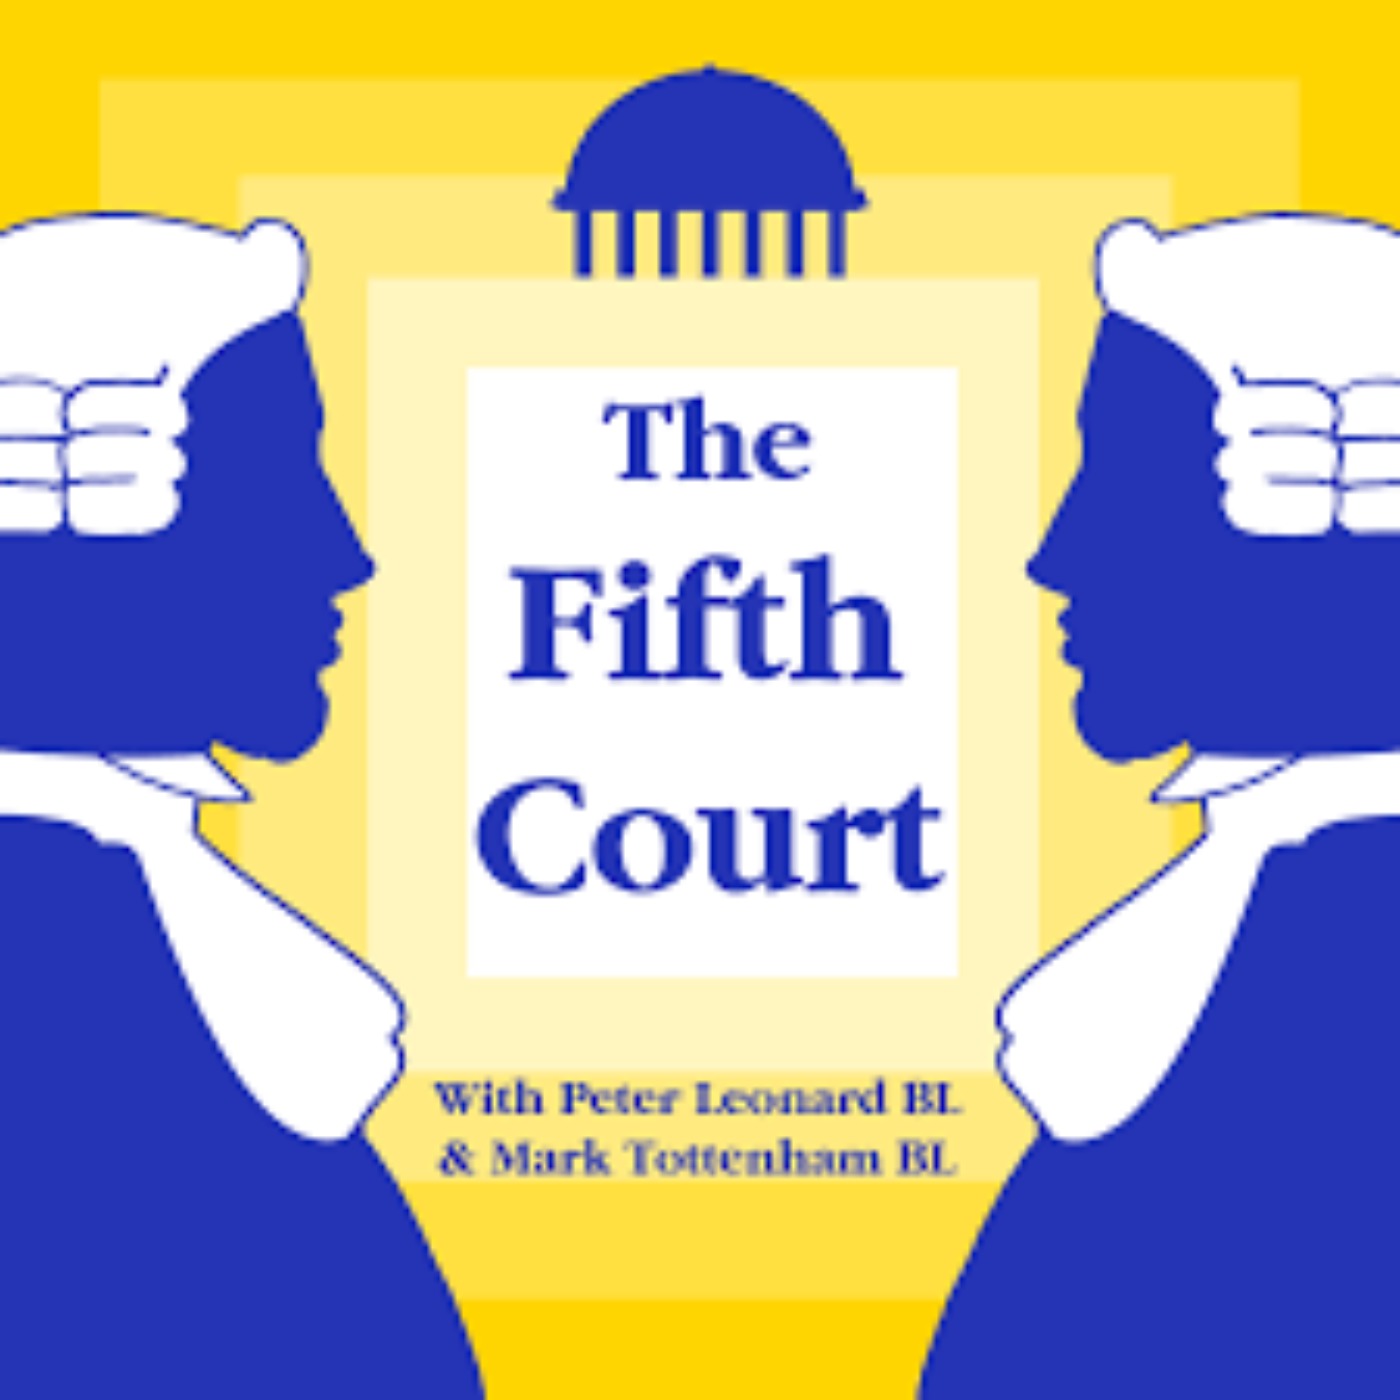 cover art for E74 The Fifth Court - Cynthia Ní Mhurchú BL - Europe, Eurovision and legal life after RTE